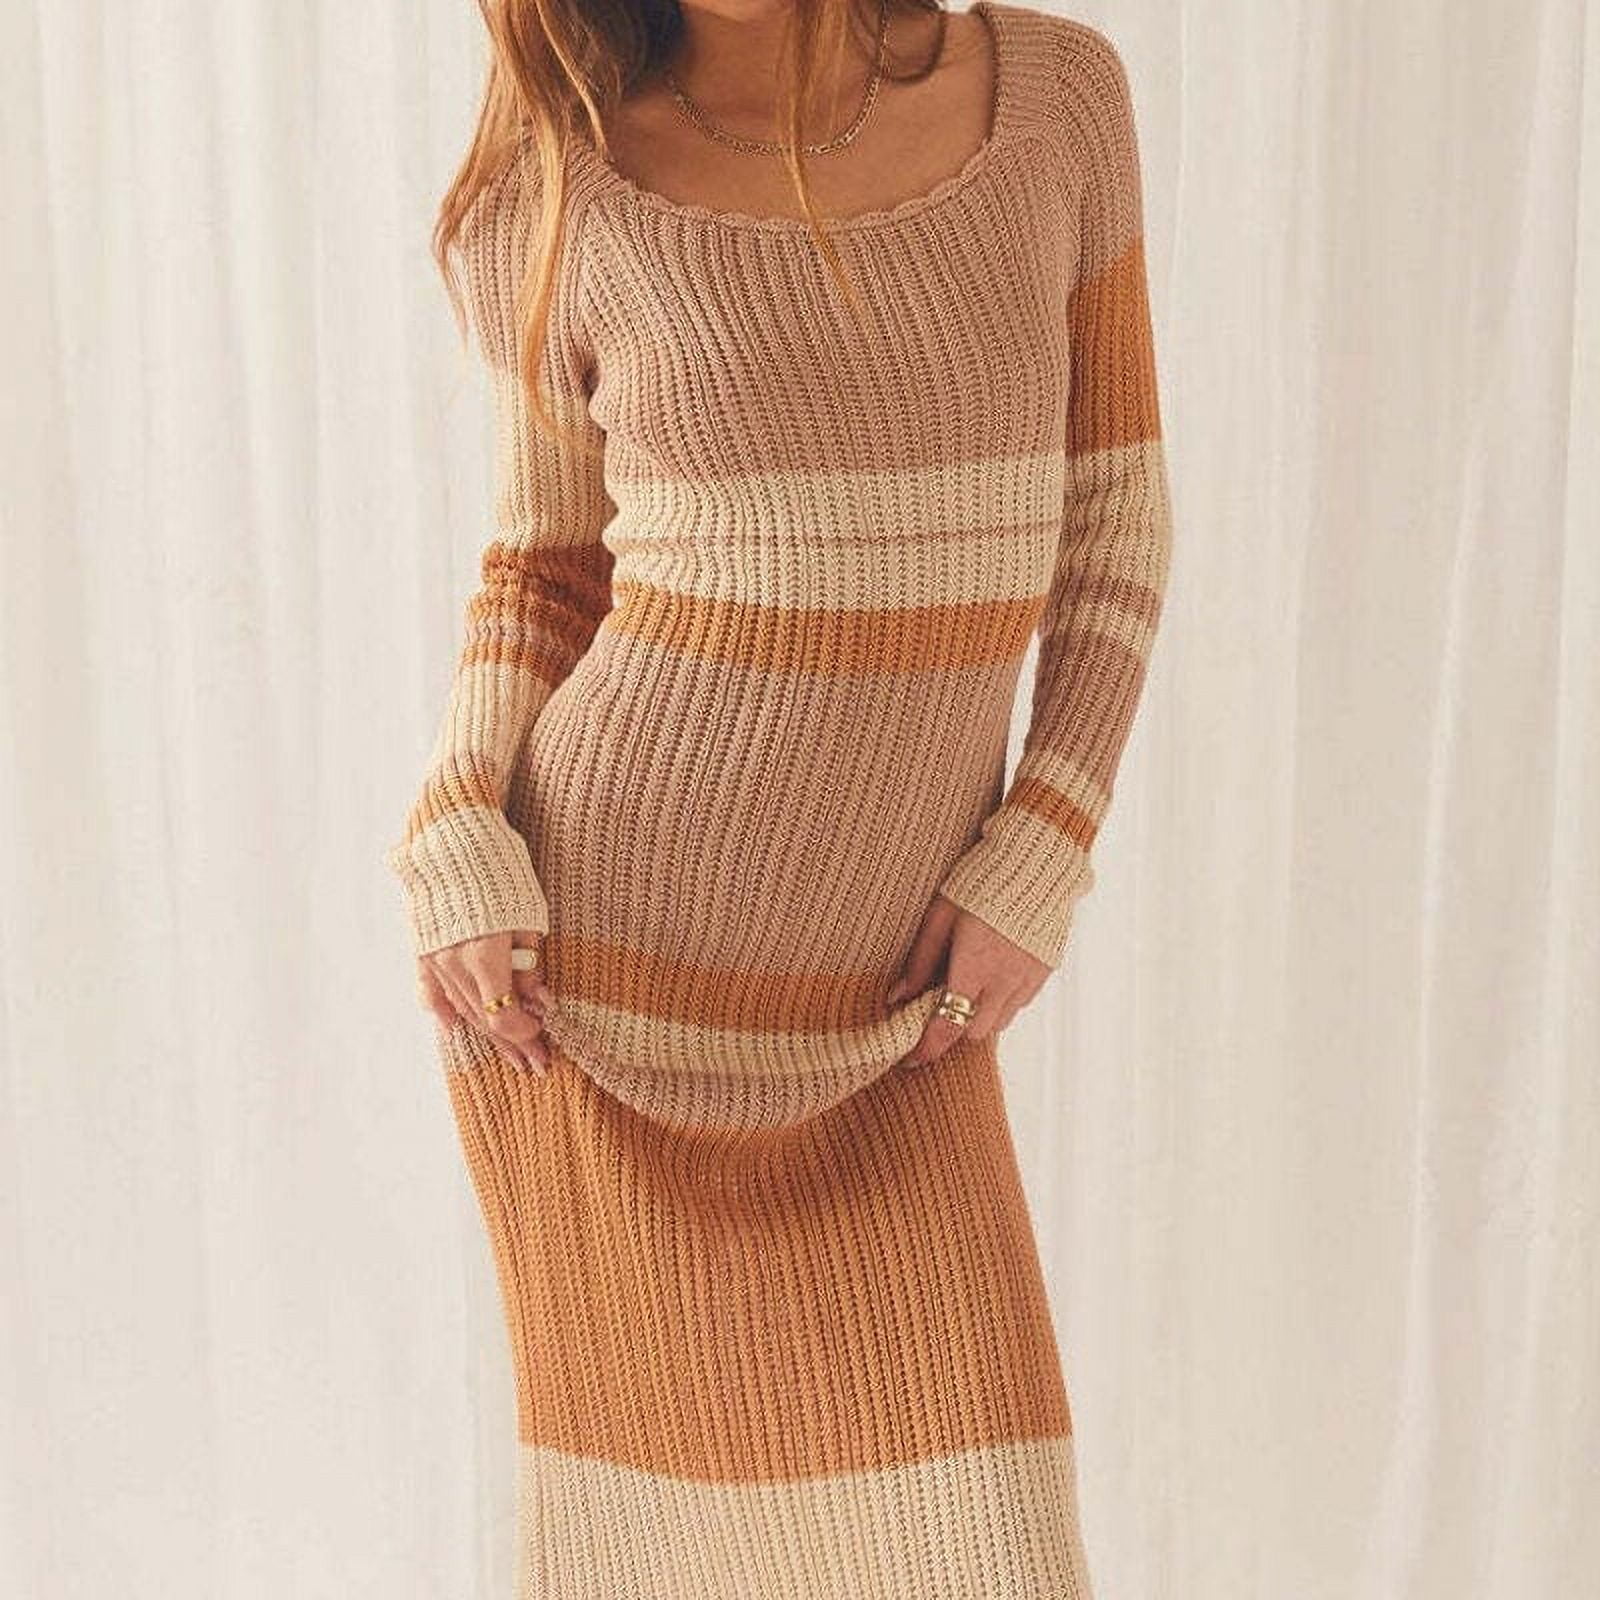 Striped Knitted Long Dress - Elegant Long Sleeve, Off Shoulder Maxi Dress,  Perfect for Women's Clothing in Hipster Style Autumn Winter 